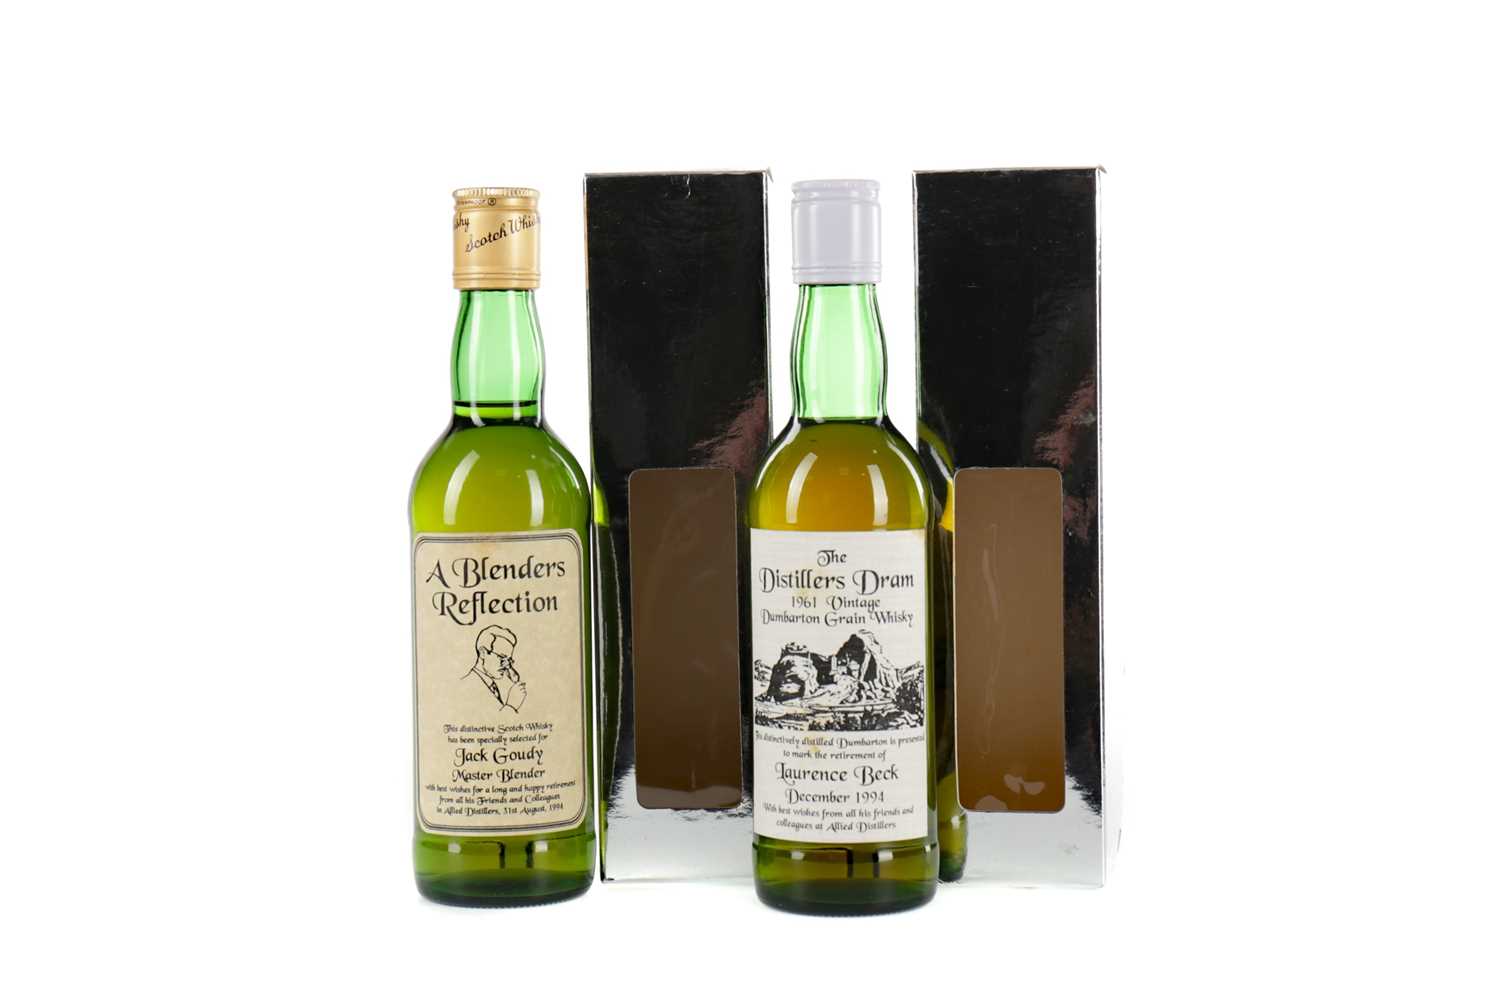 Lot 75 - DUMBARTON 1961 THE DISTILLERS DRAM, AND A BLENDERS REFLECTION